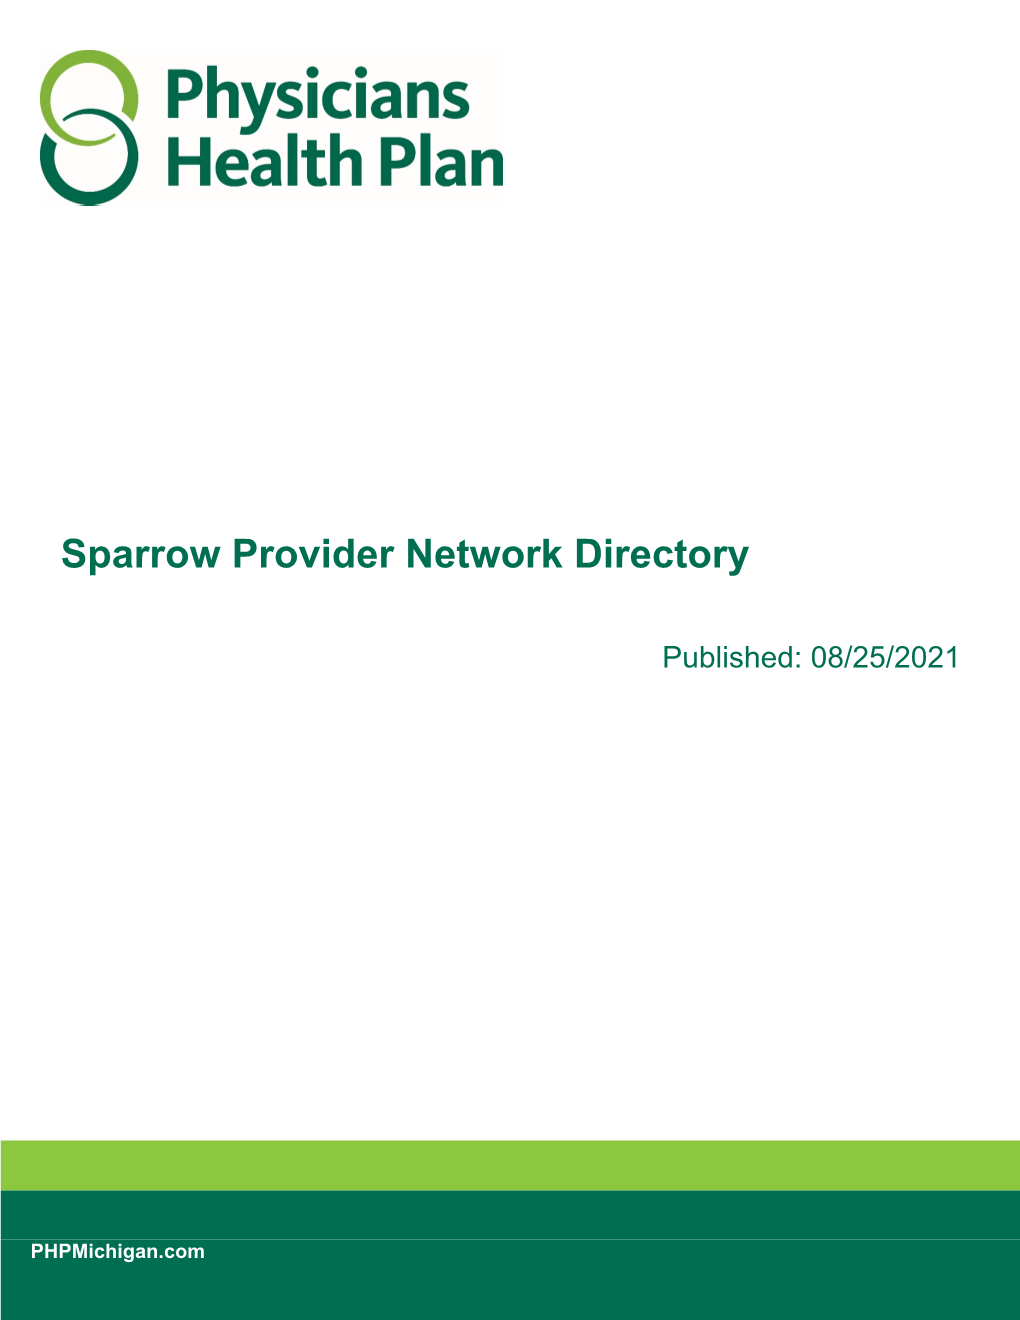 Sparrow Provider Network Directory